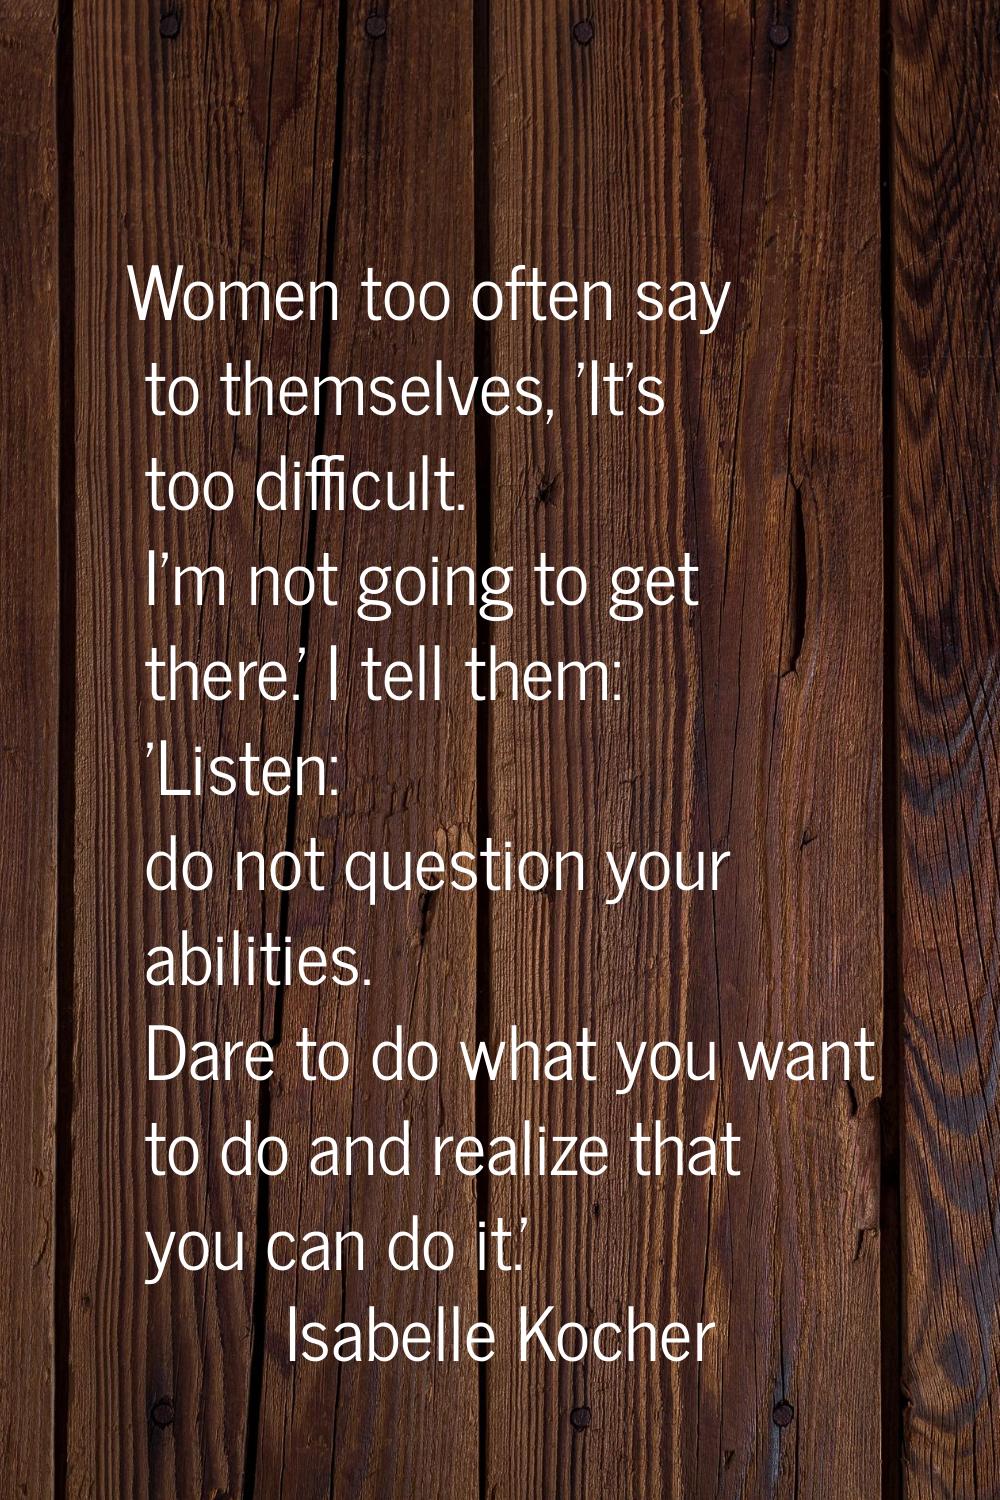 Women too often say to themselves, 'It's too difficult. I'm not going to get there.' I tell them: '